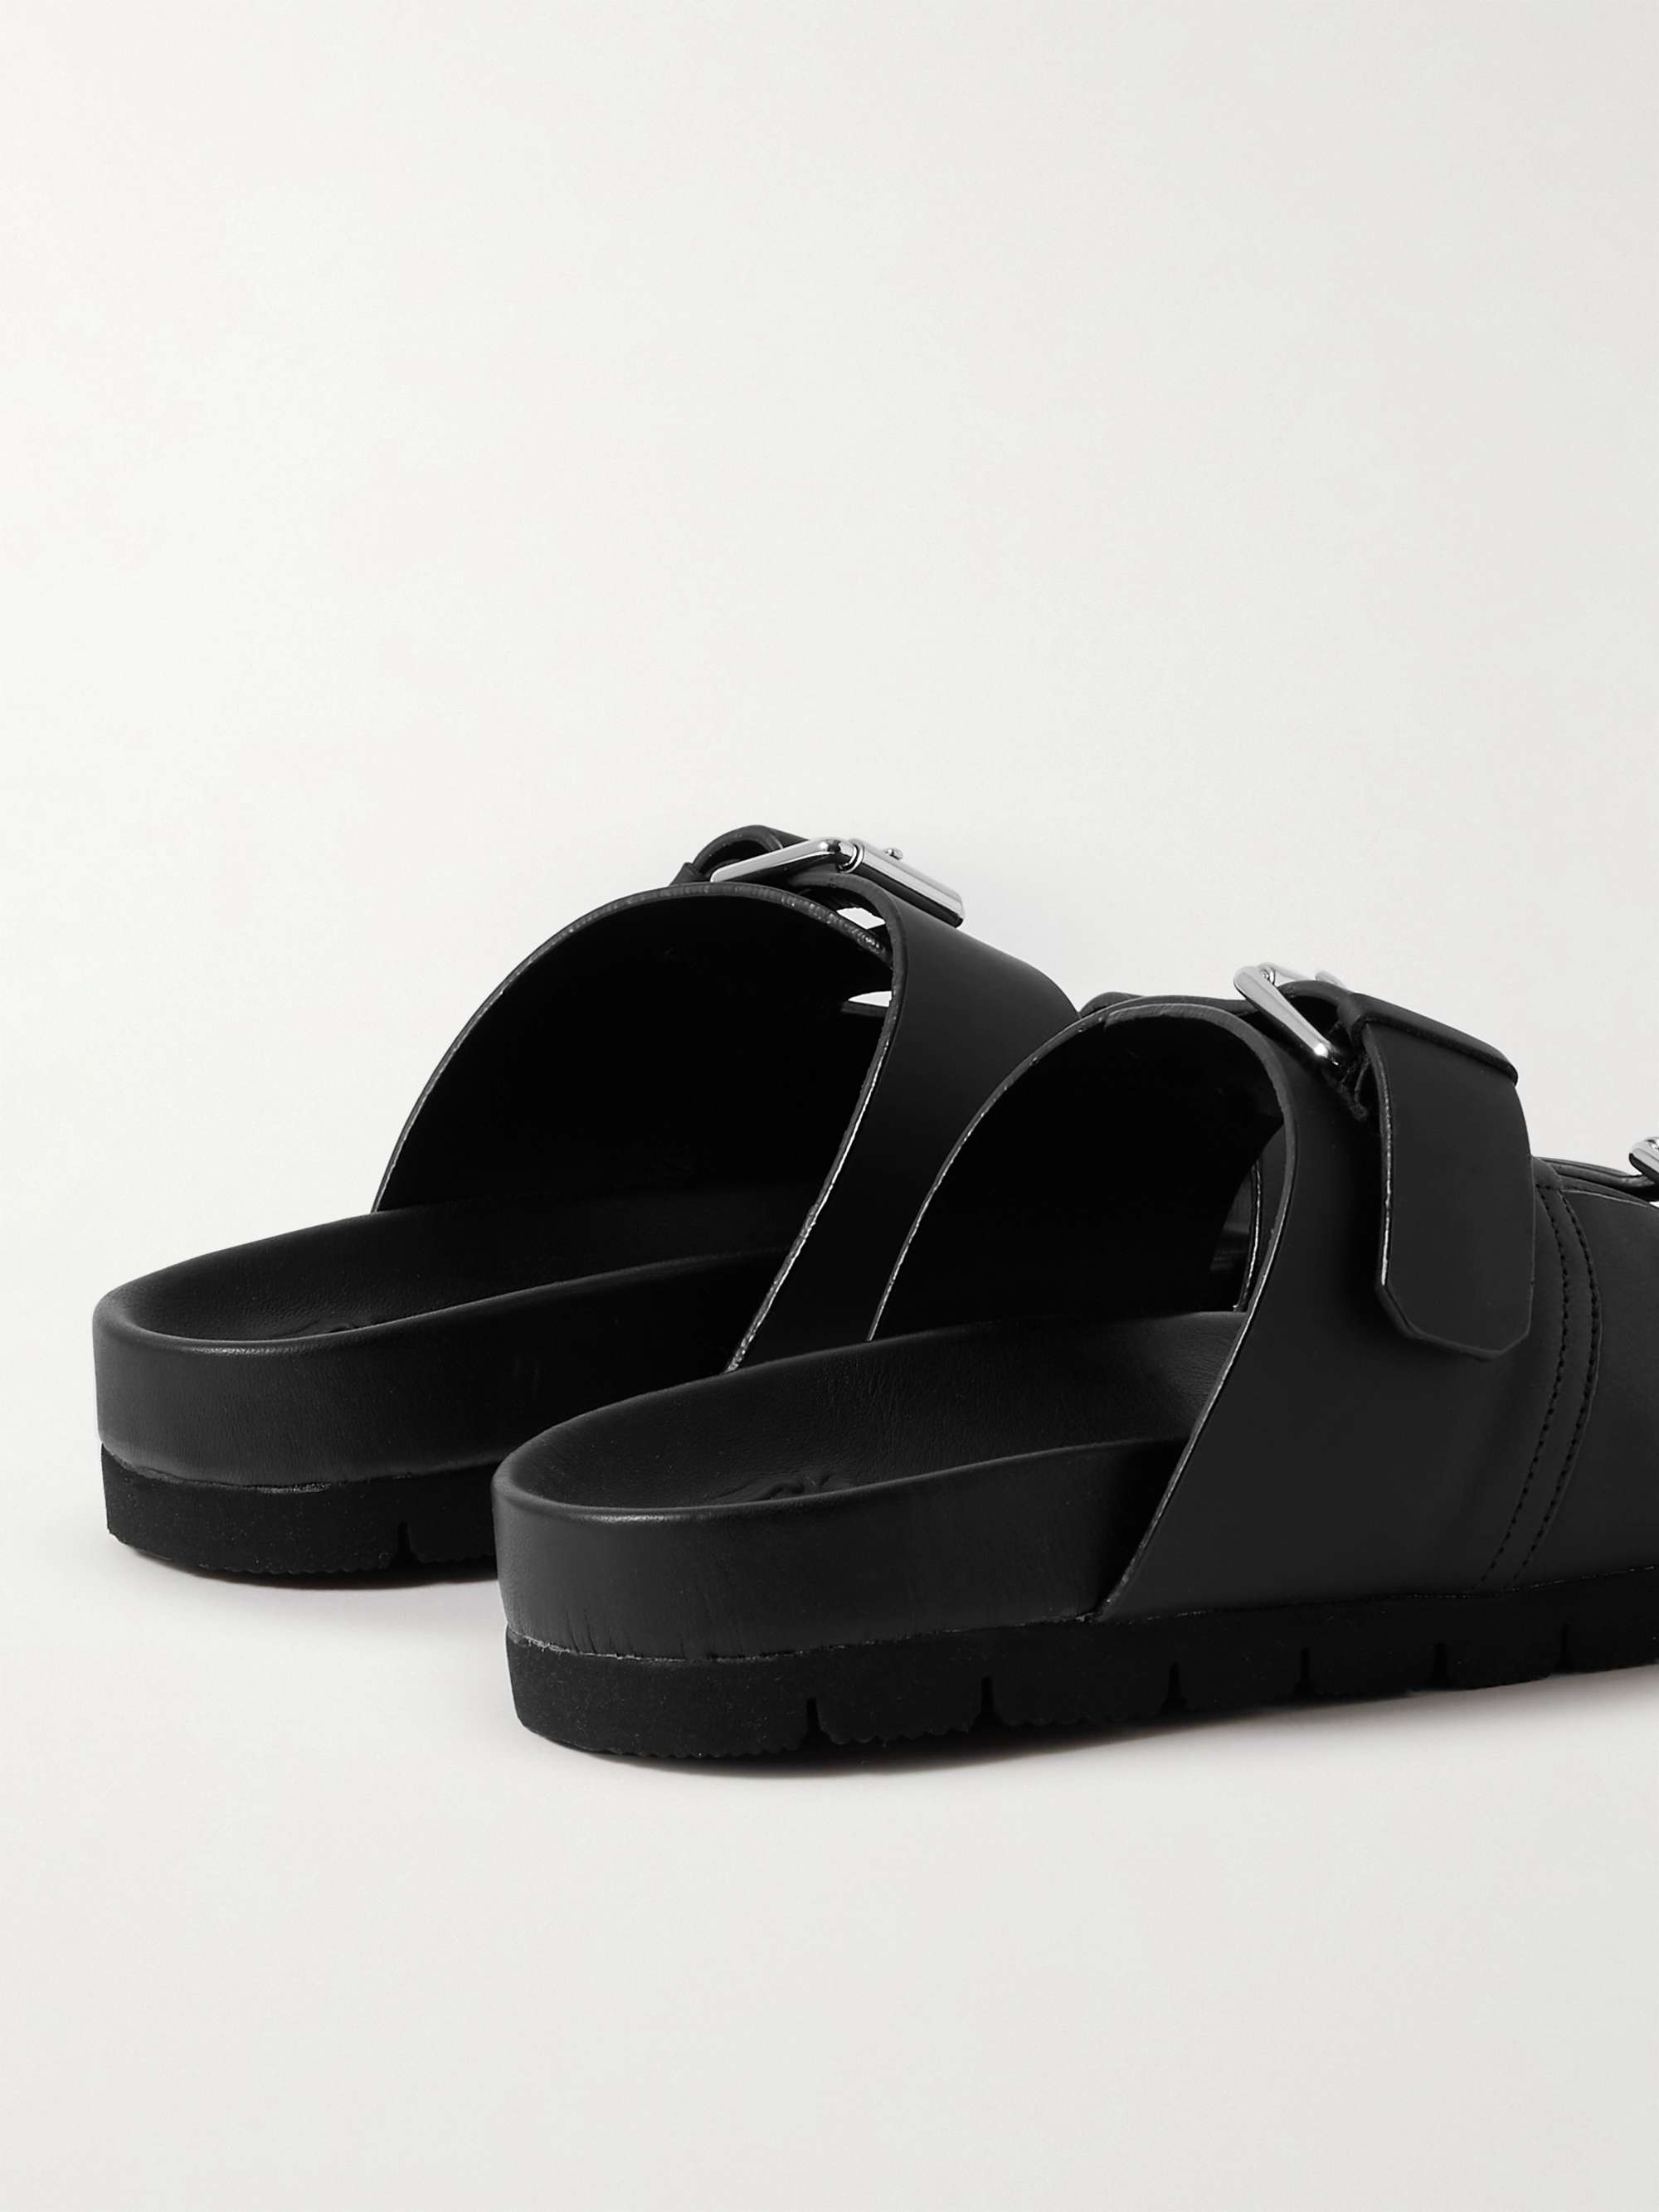 GRENSON Florin Rubberised Leather Sandals